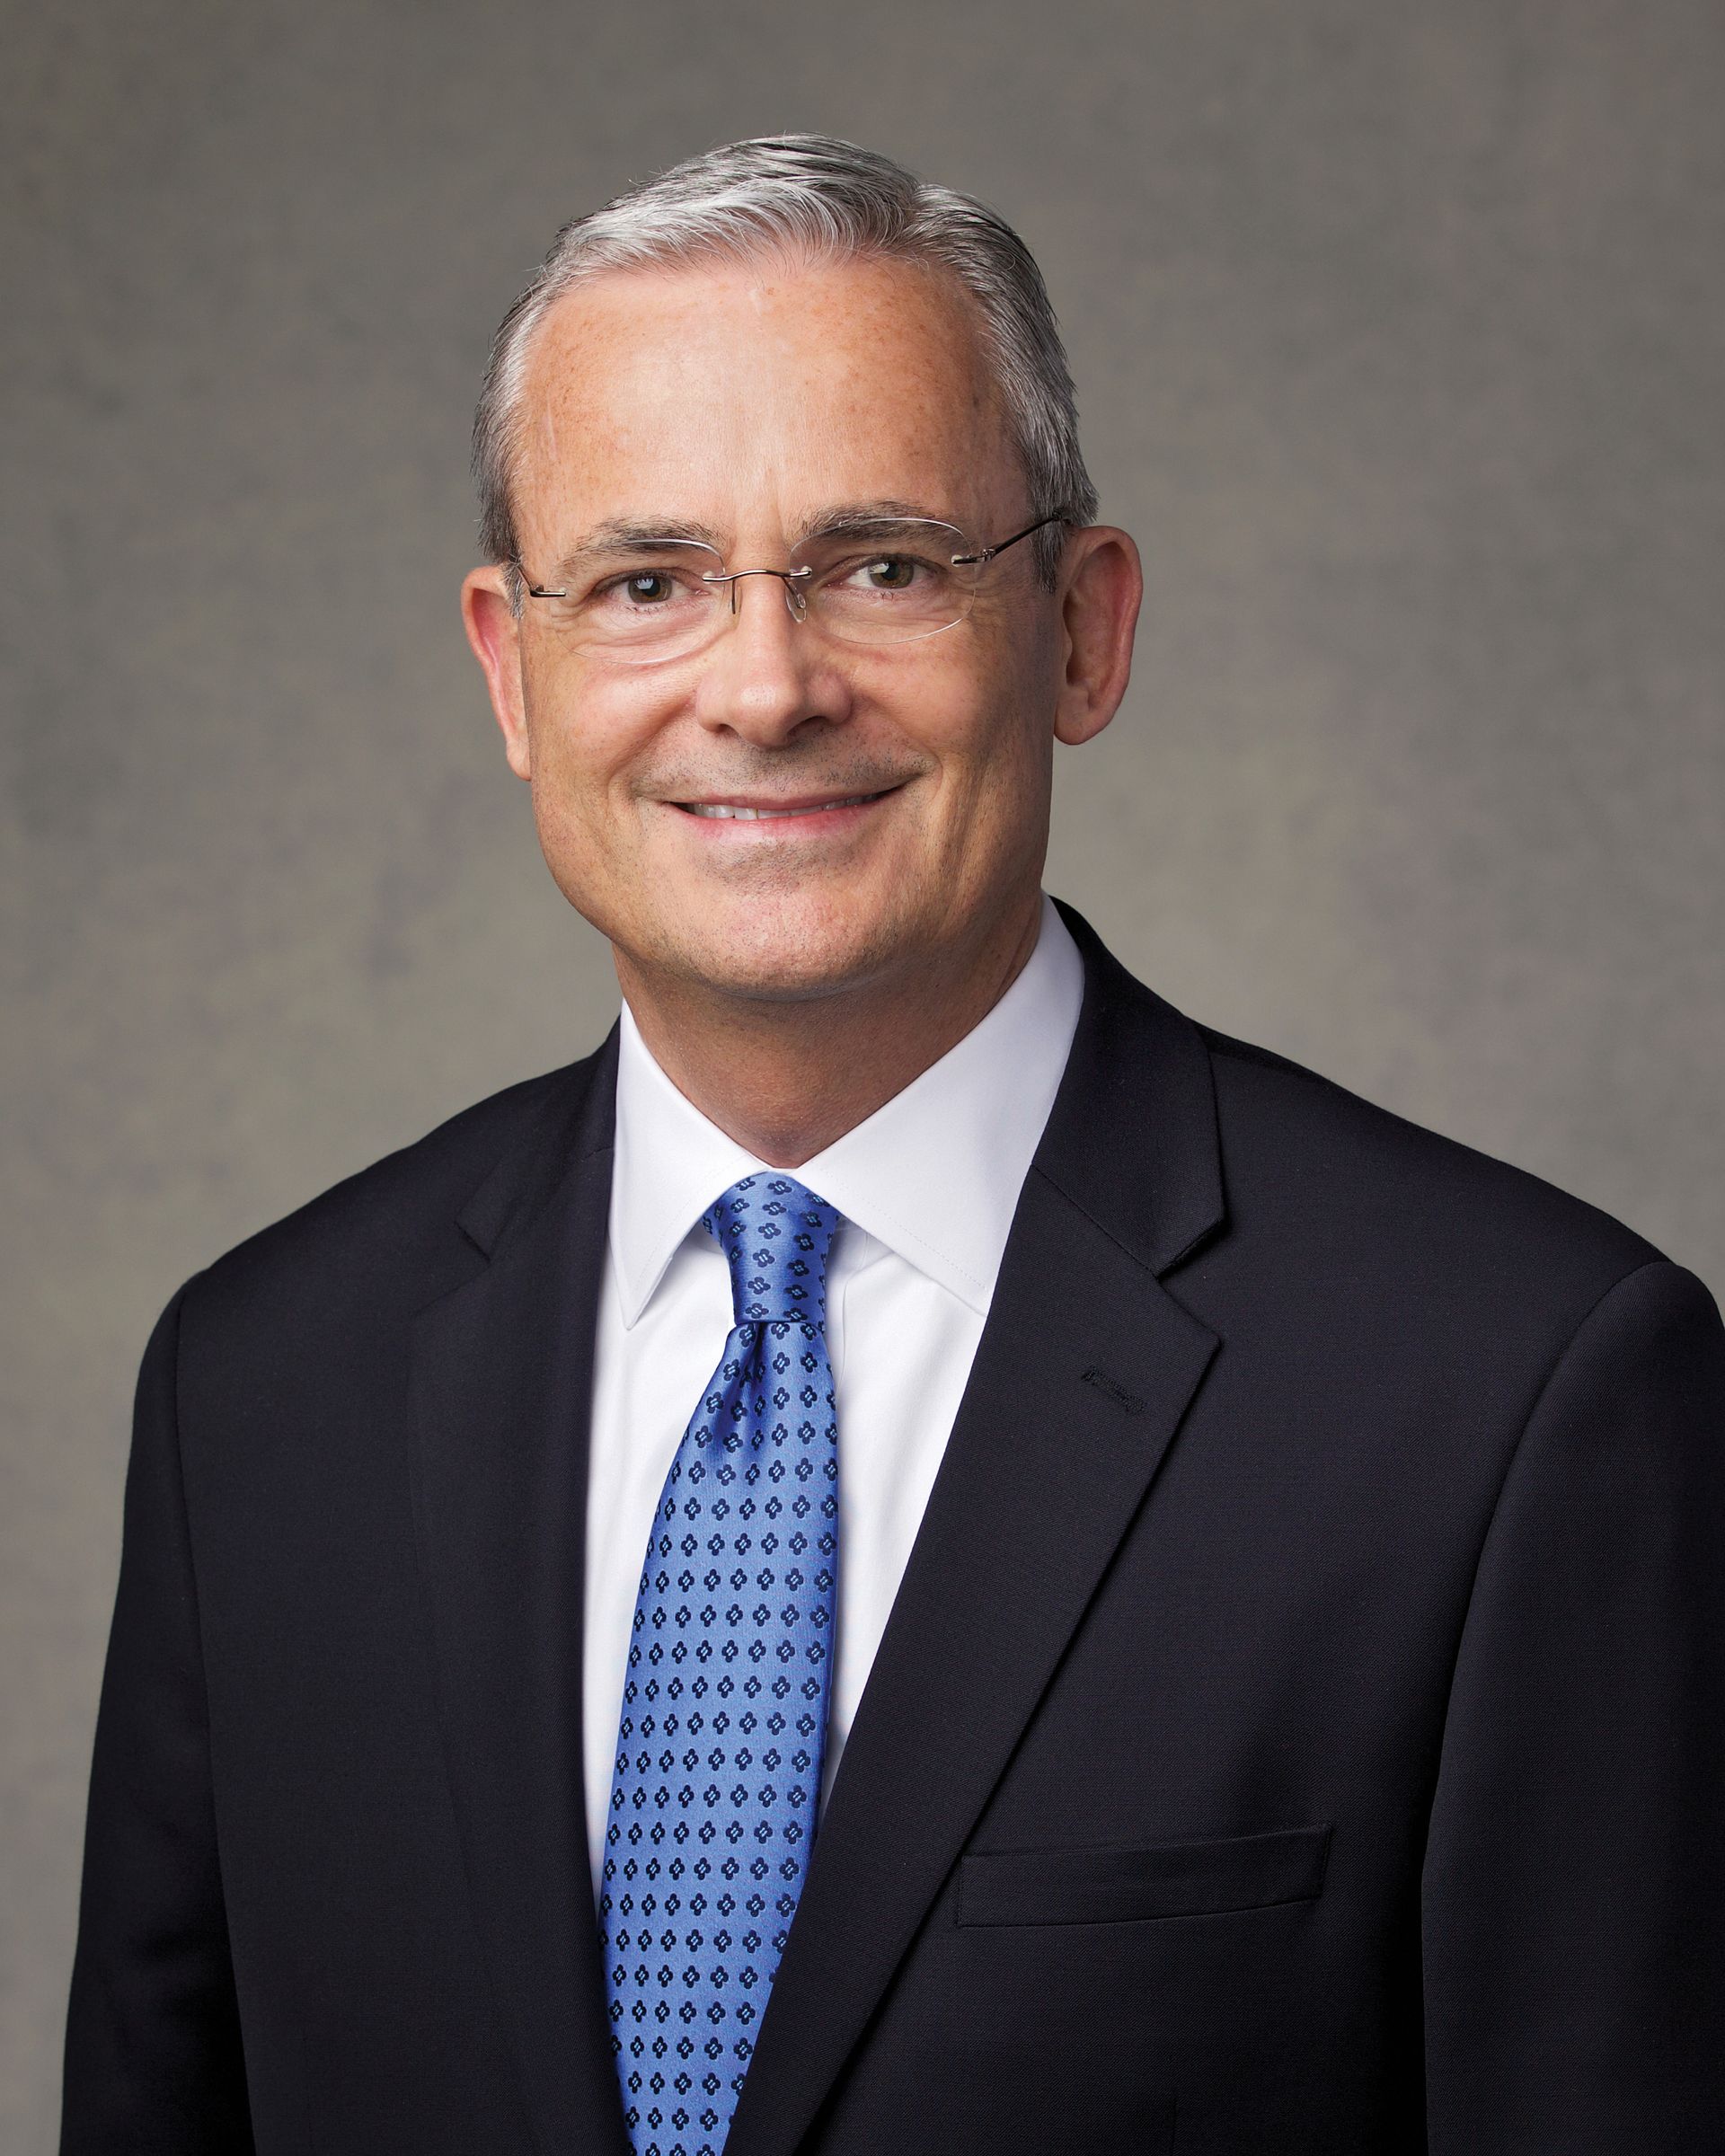 The official portrait of Elder Patrick Kearon of the Presidency of the Seventy of The Church of Jesus Christ of Latter-day Saints.